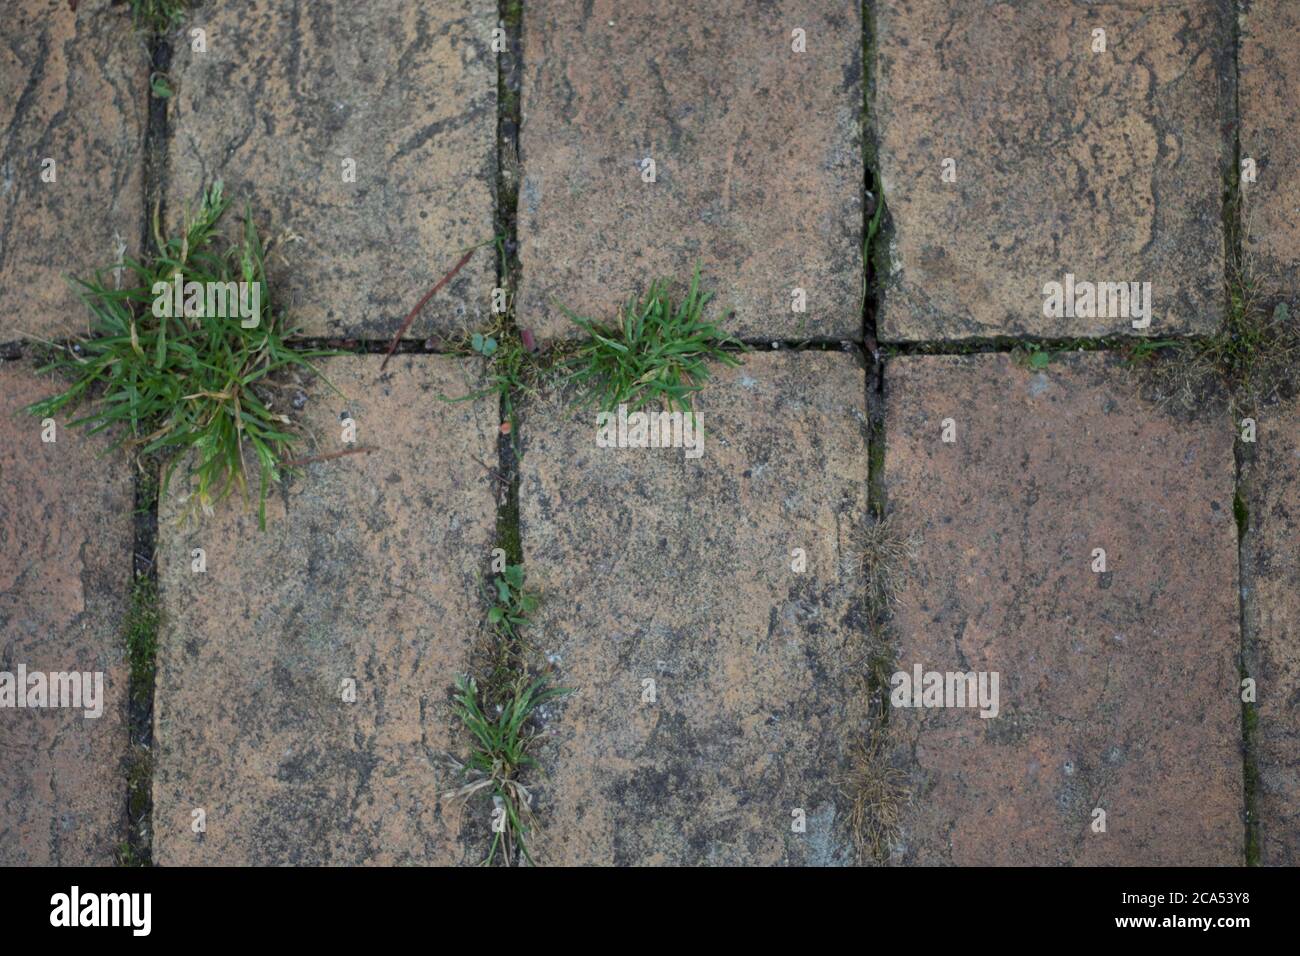 Old paving slab background with rough grass growing in gaps Stock Photo